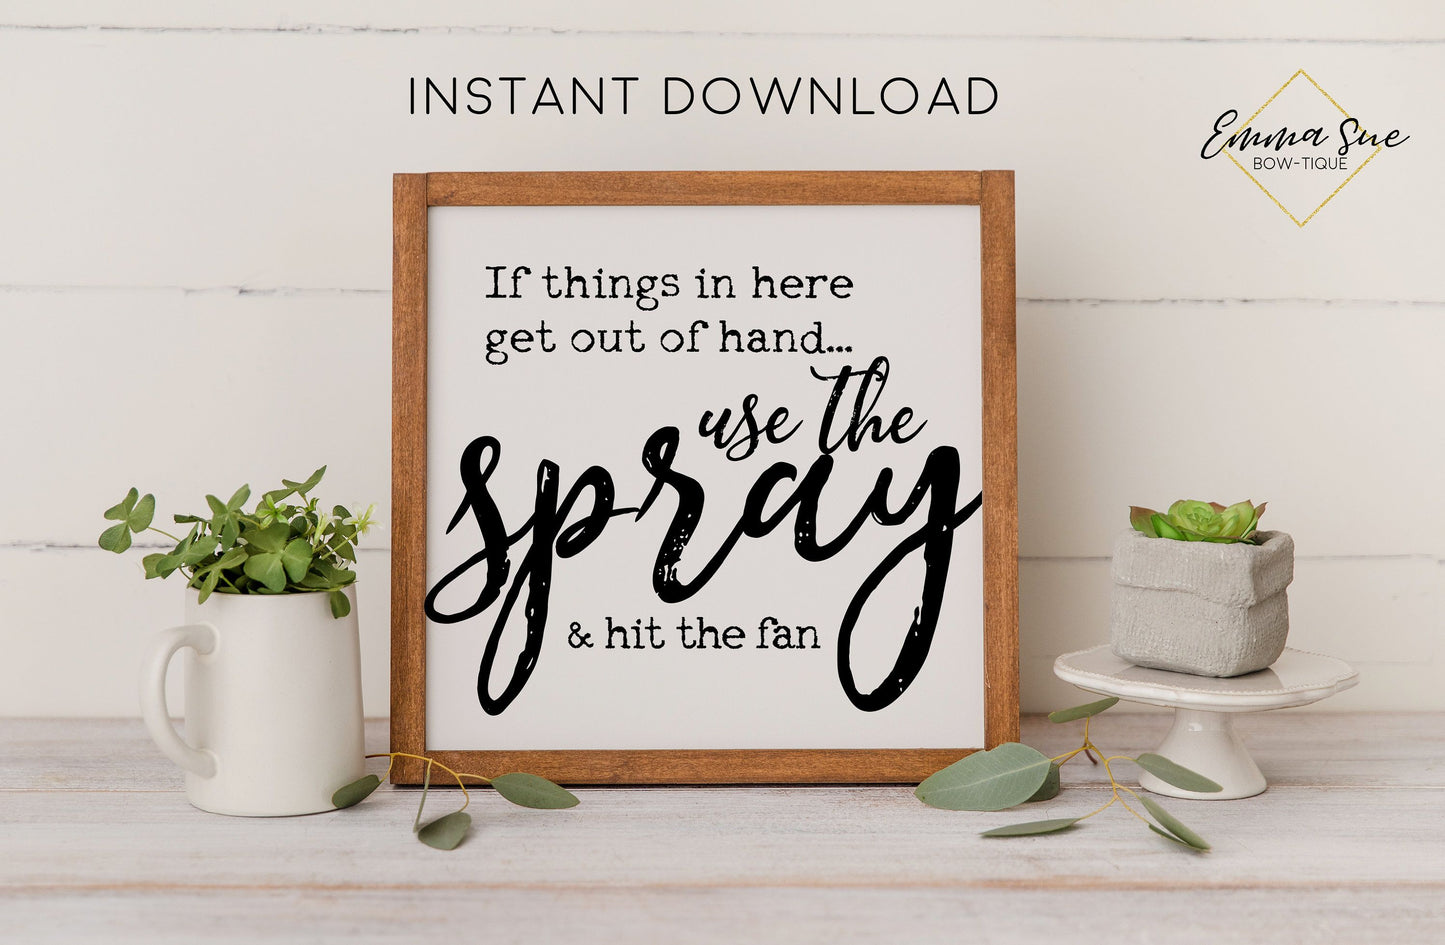 If things in here get out of hand use the spray & hit the fan Bathroom Wall Art Digital Printable